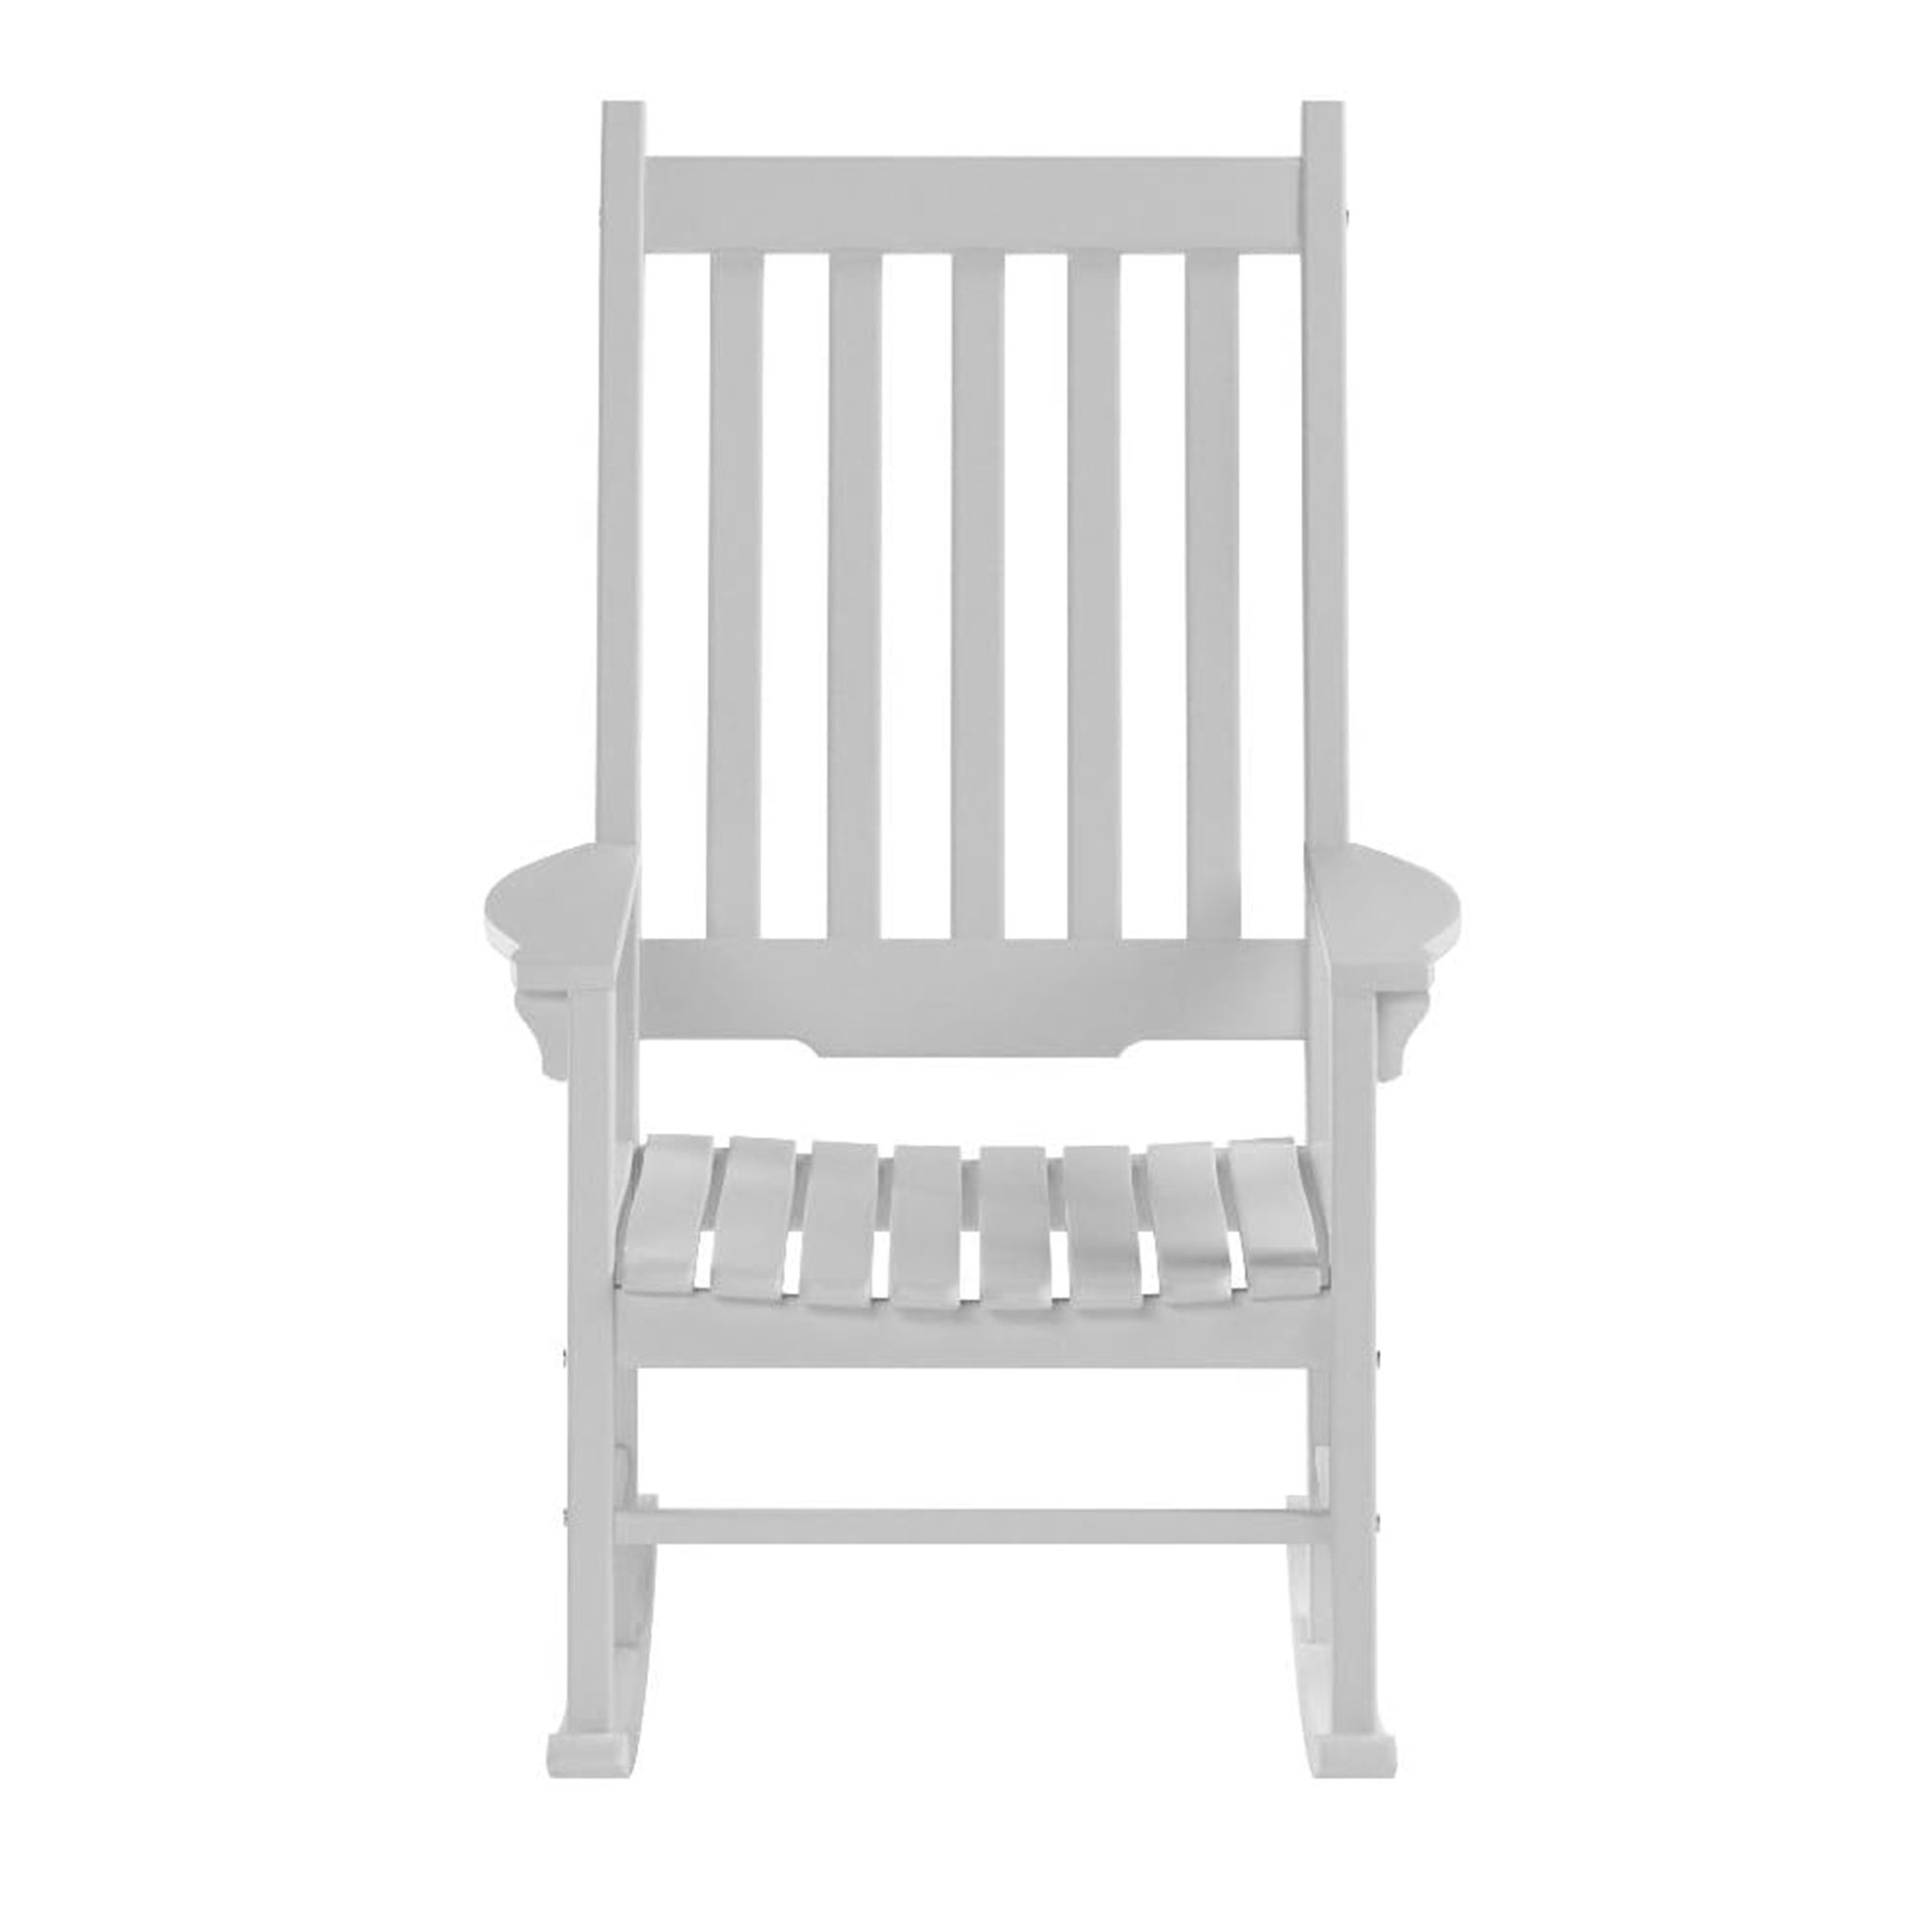 Northbeam Solid Acacia Hardwood Outdoor Patio Slatted Back Rocking Chair, White - image 2 of 11